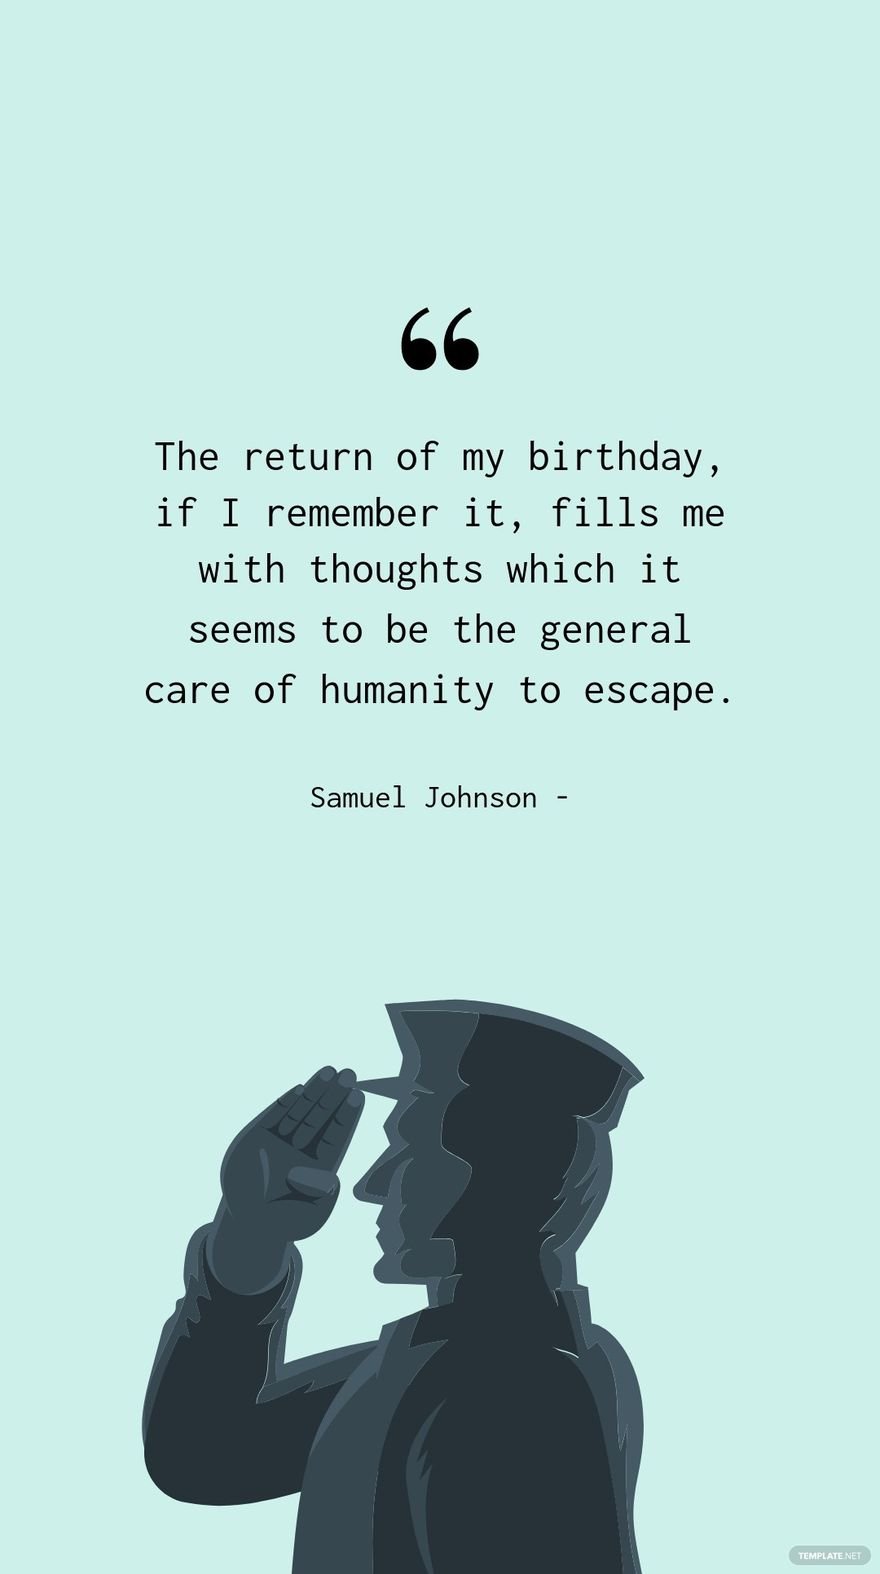 Free Samuel Johnson - The return of my birthday, if I remember it, fills me with thoughts which it seems to be the general care of humanity to escape. in JPG